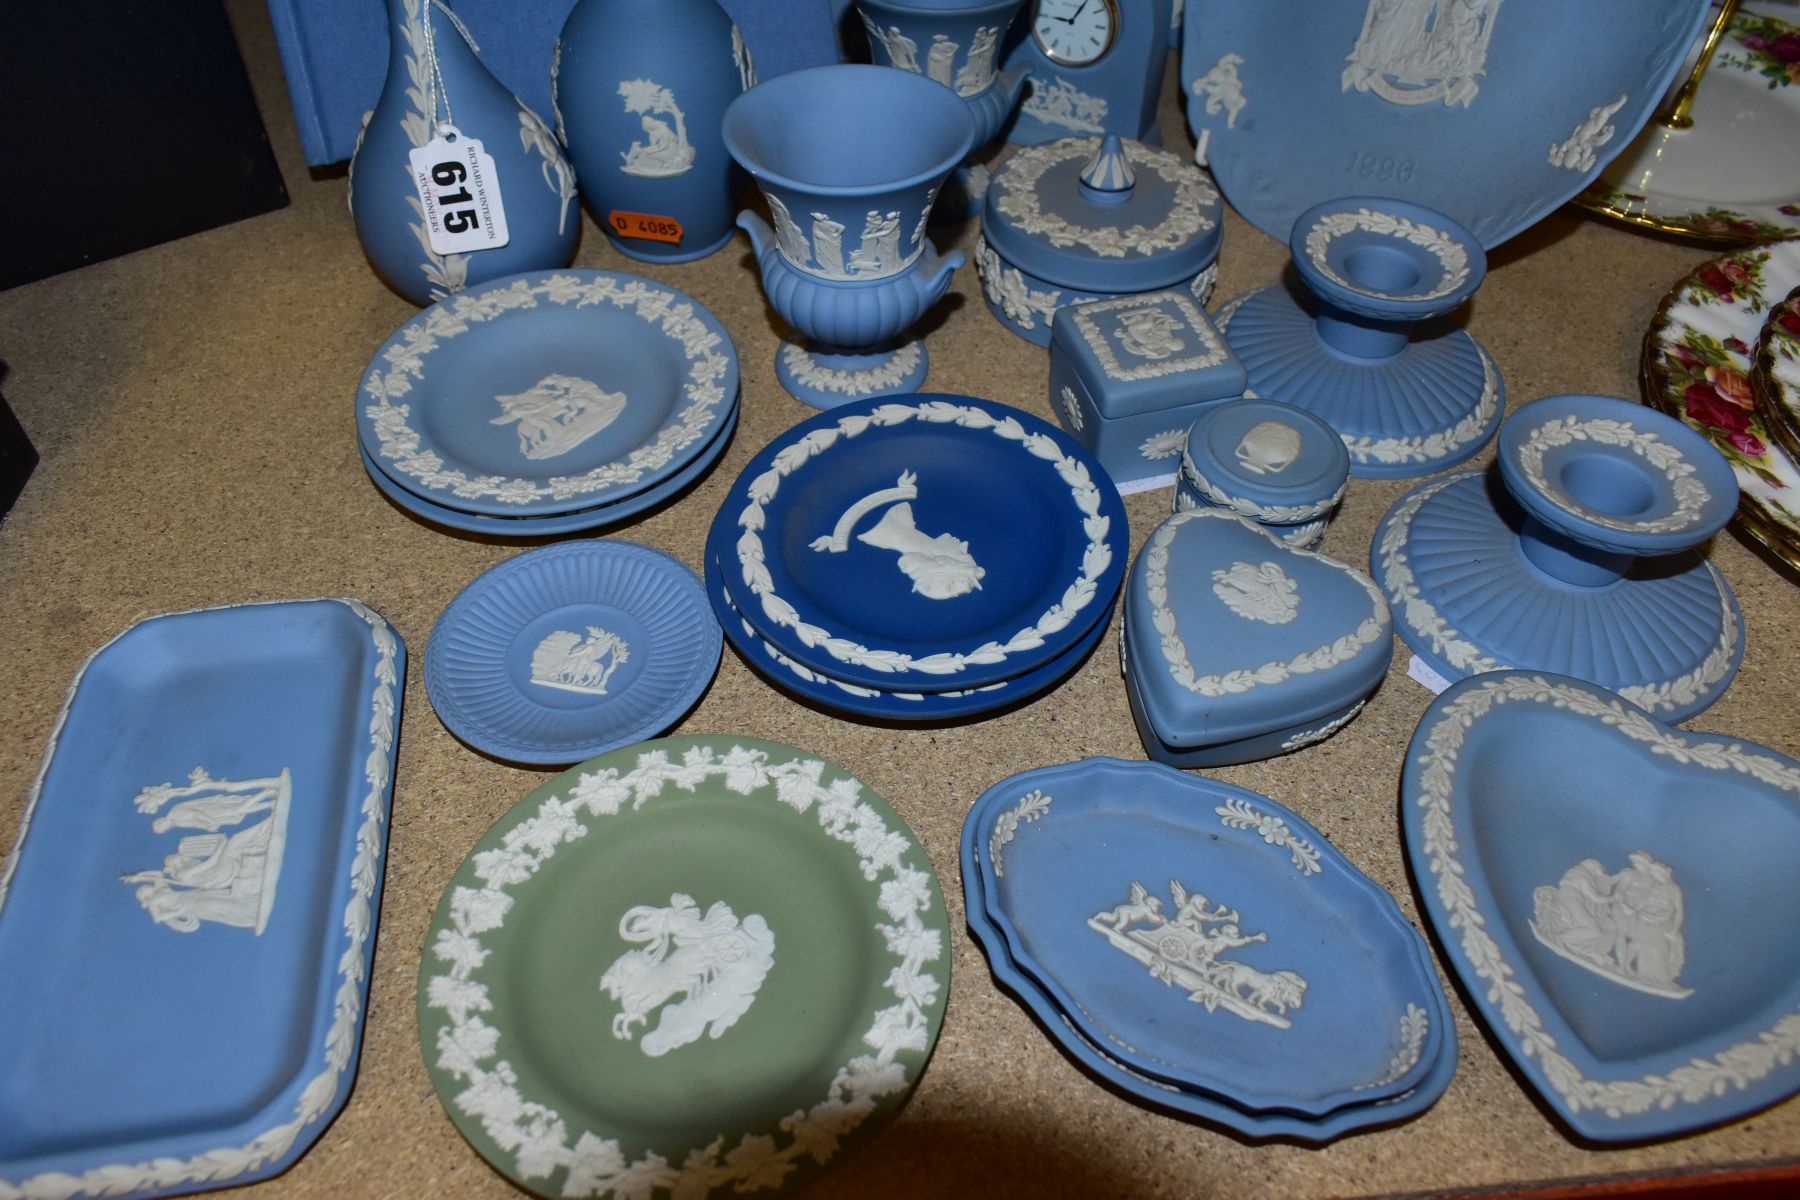 A GROUP OF WEDGWOOD JASPERWARE, mainly pale blue including bud vases, small urn shaped vases, a - Image 2 of 6